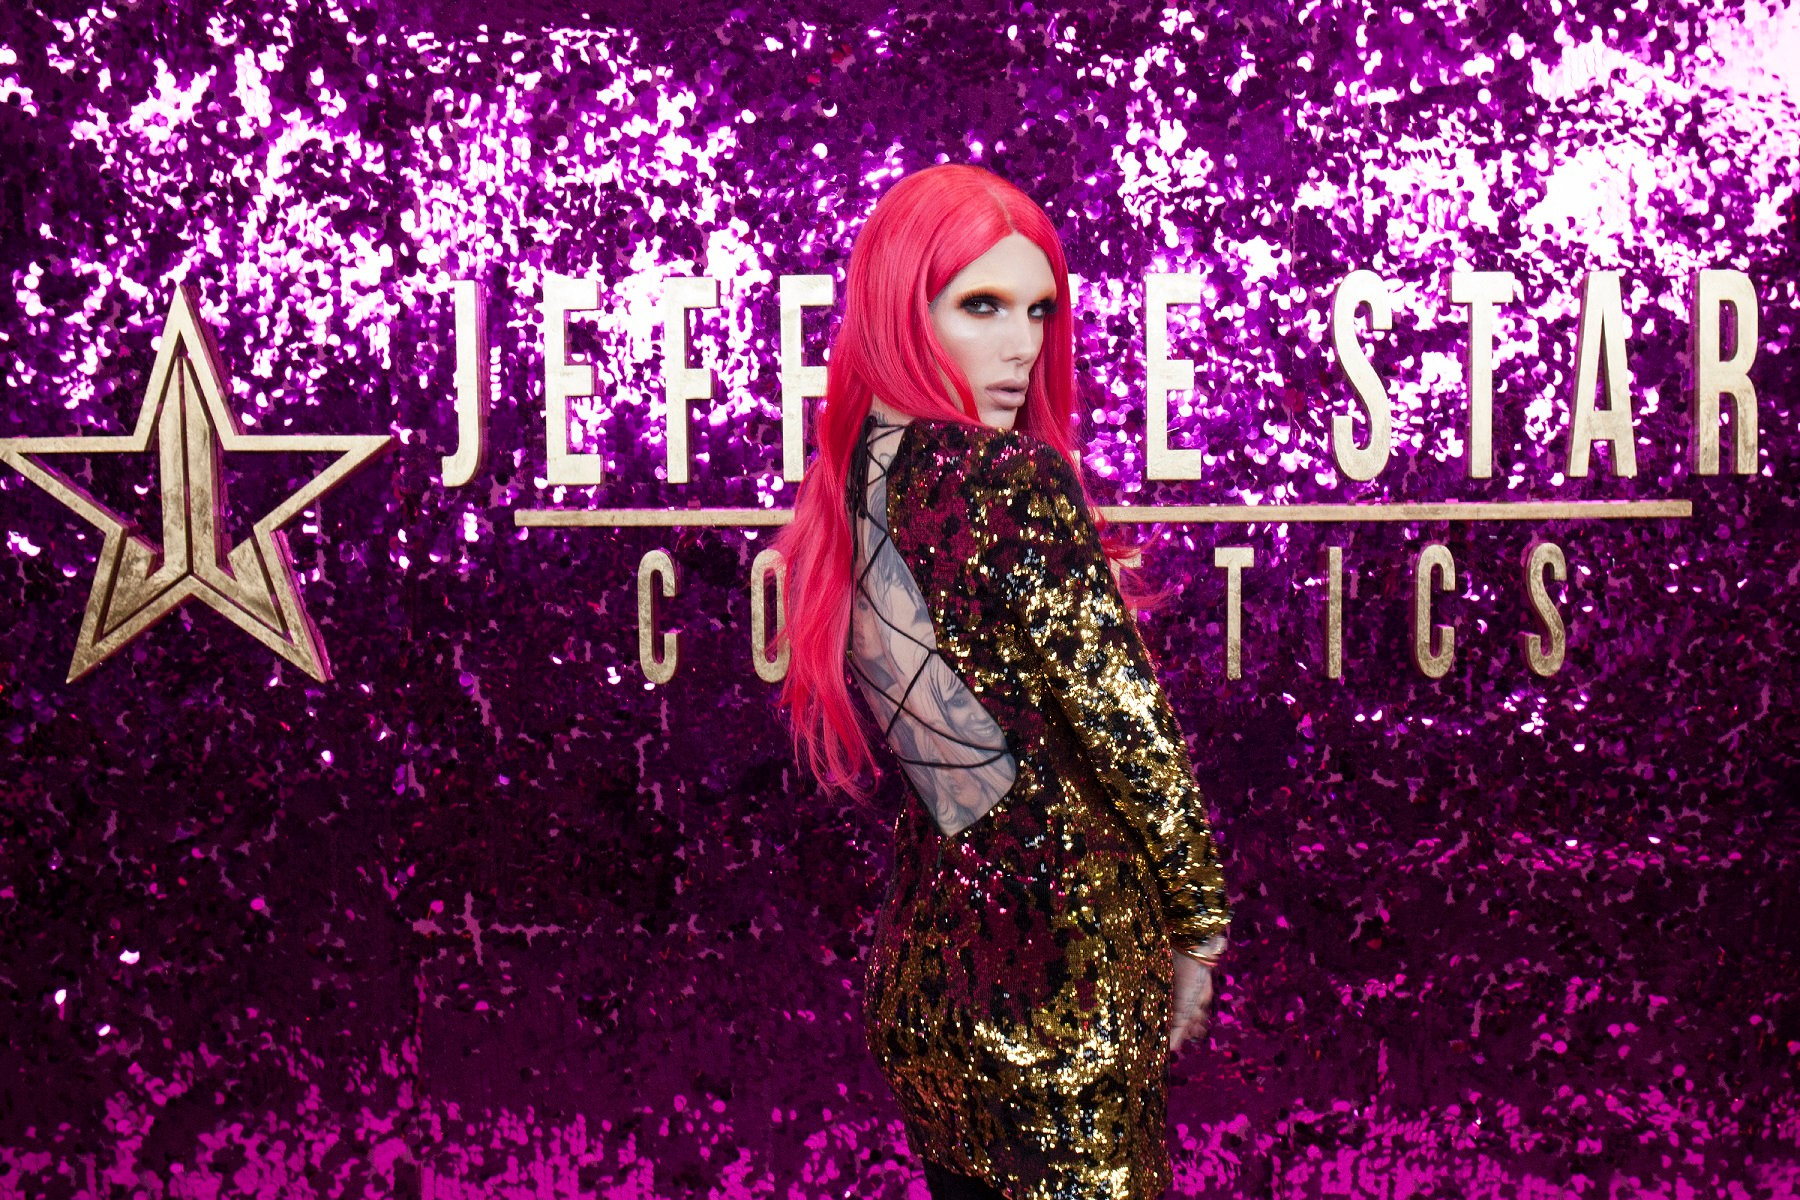 Jeffree Star attends the 3rd Annual RuPaul's DragCon at Los Angeles Convention Center